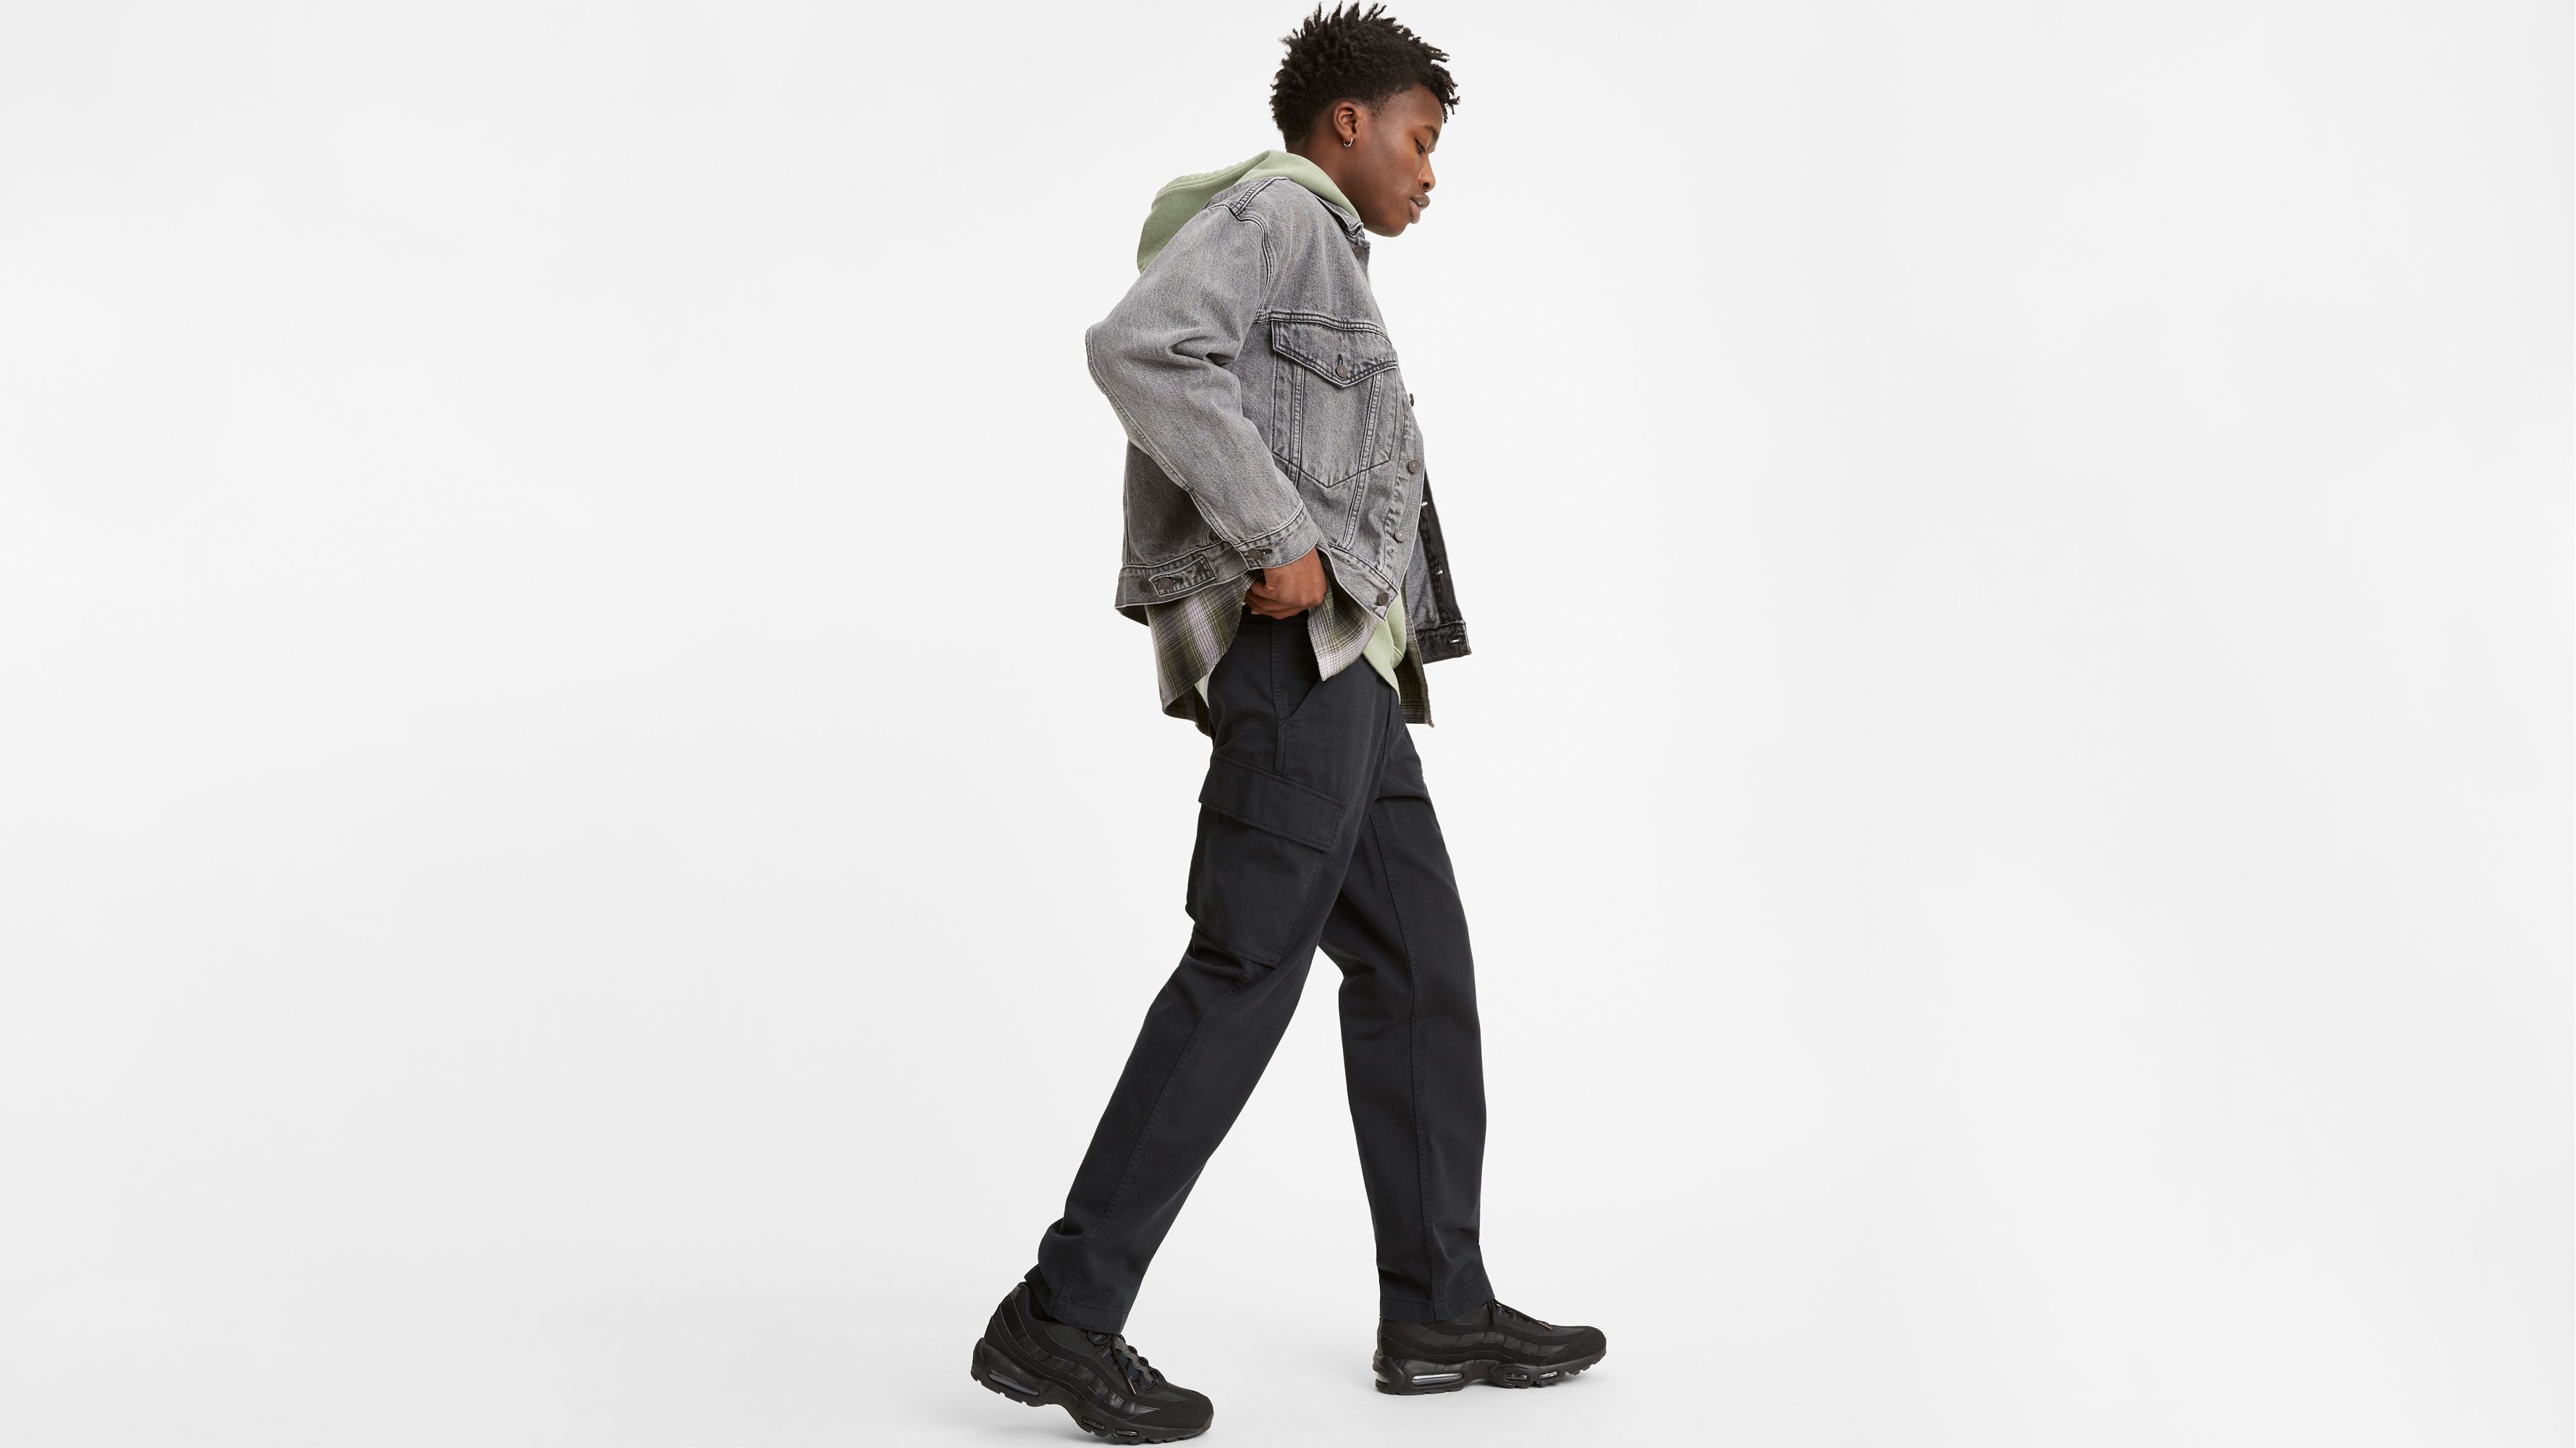 levis cargo pants relaxed fit